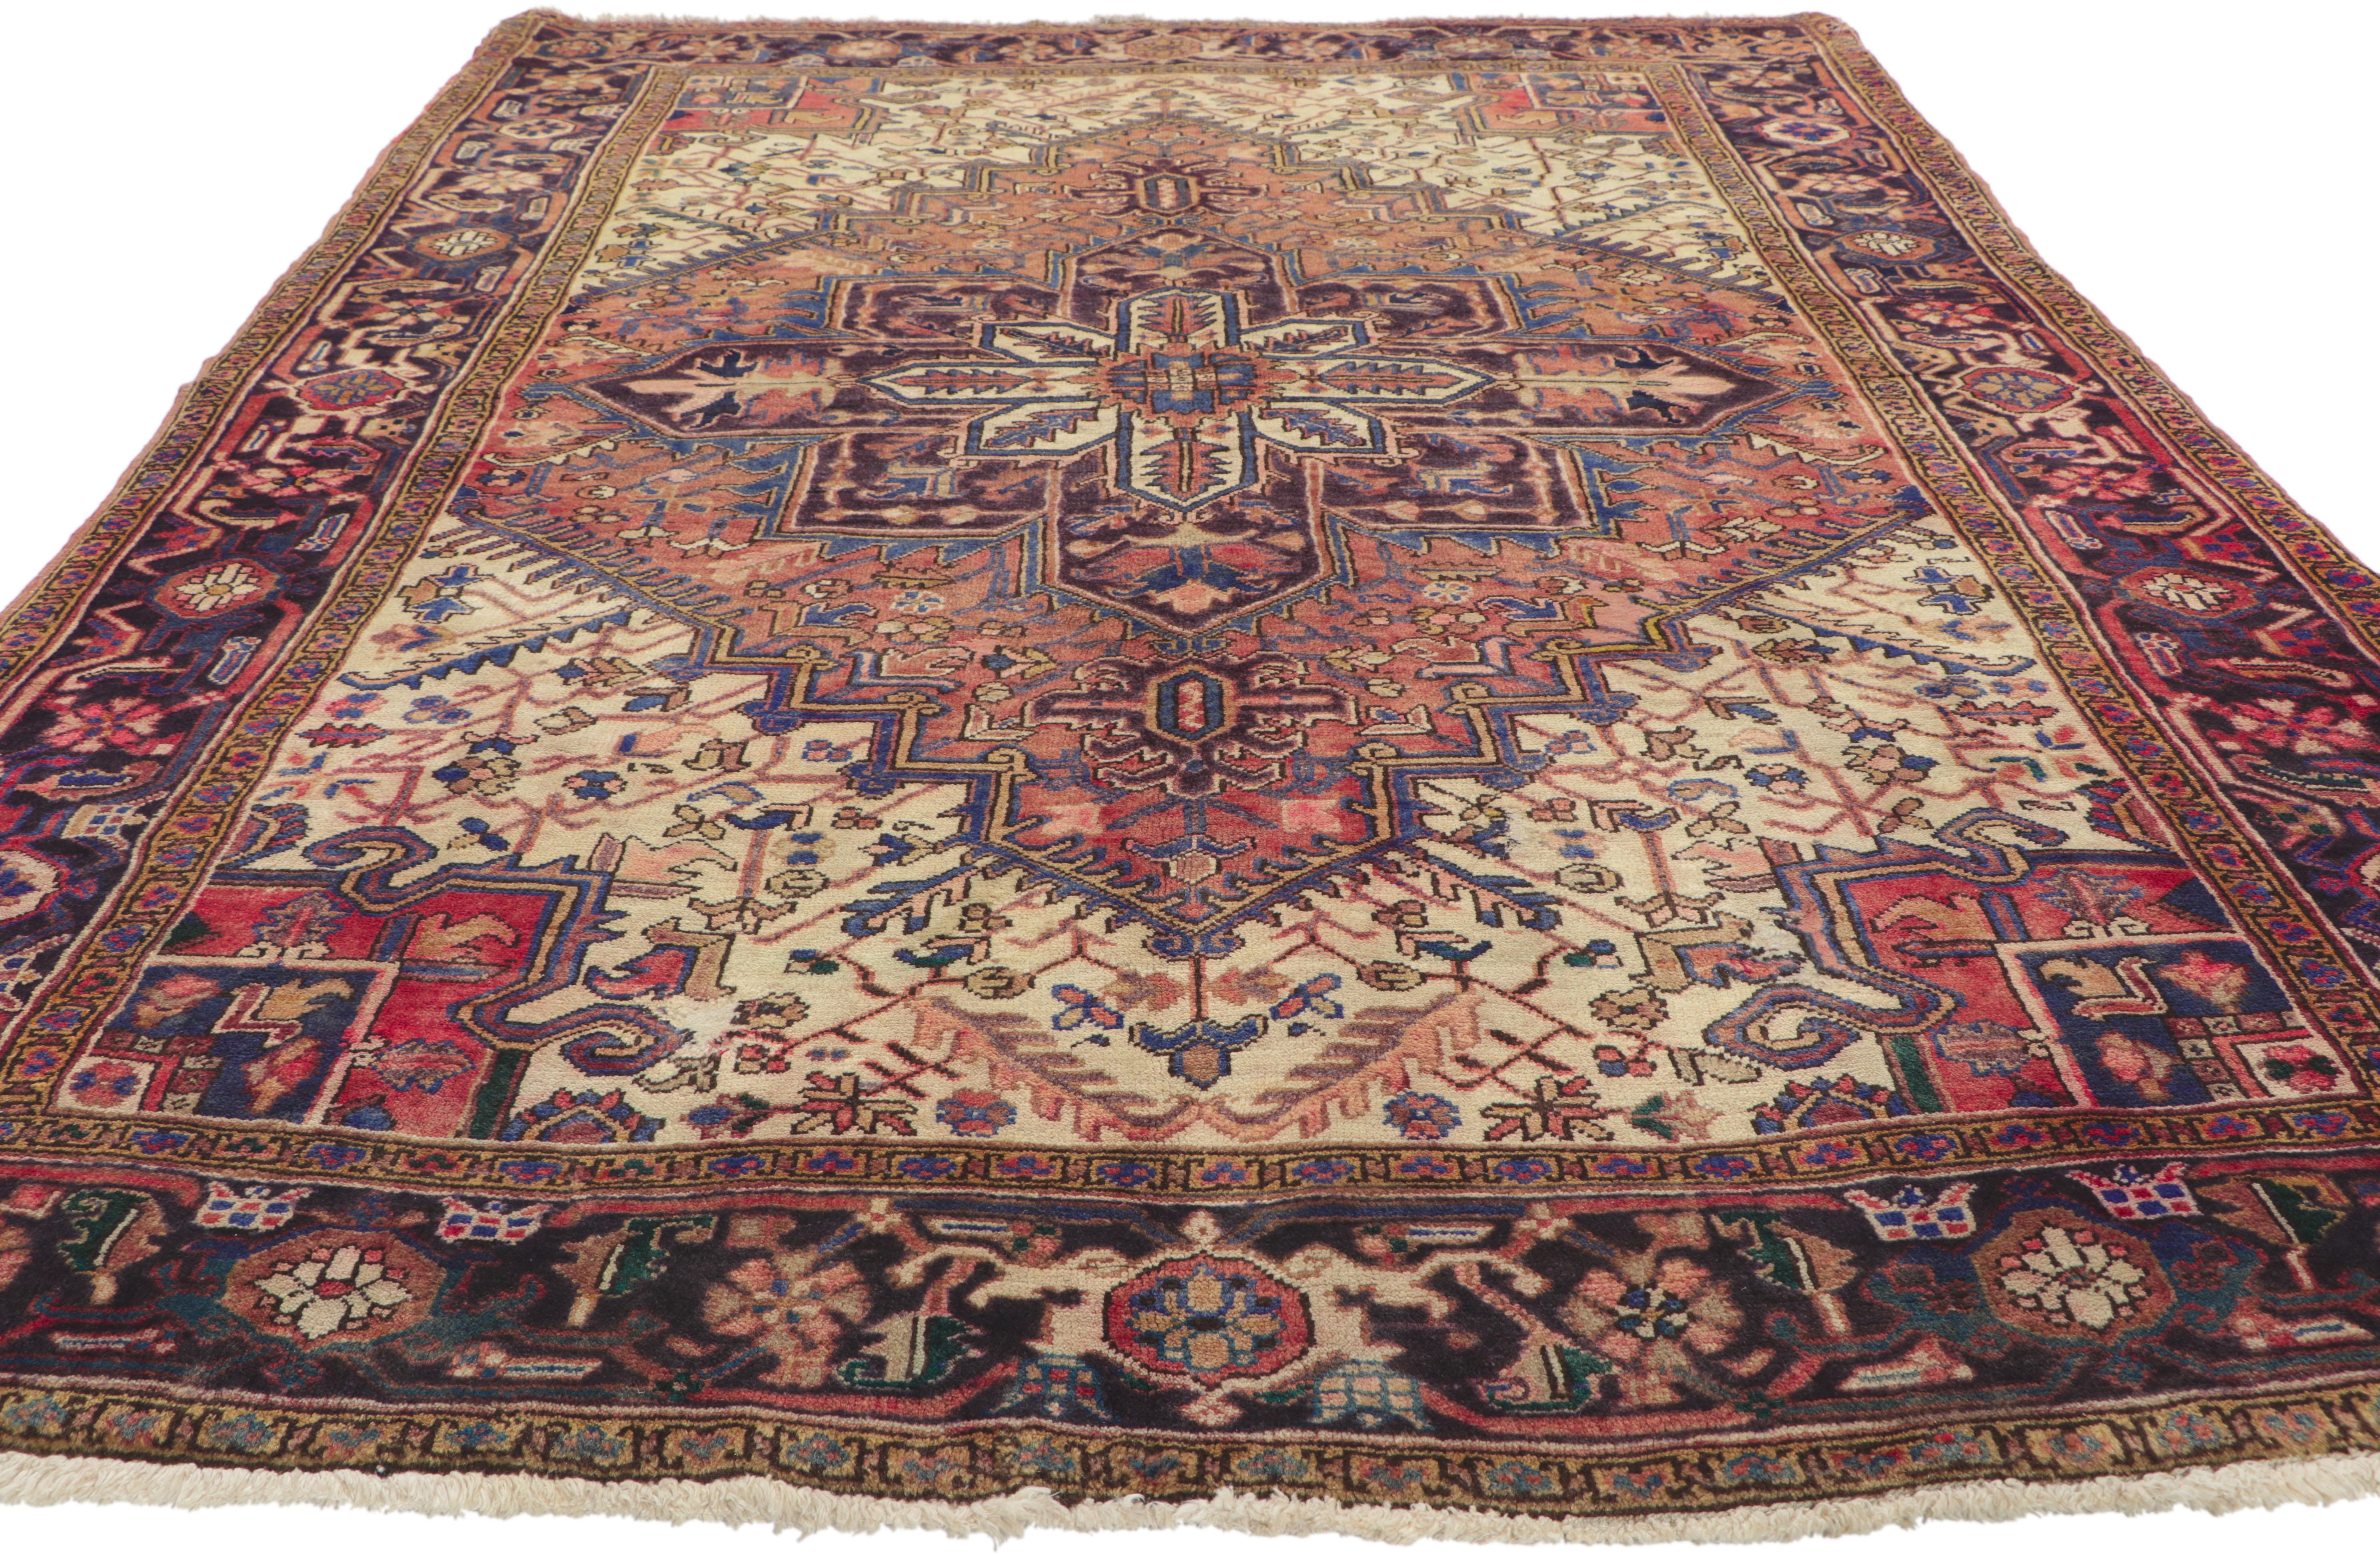 75557 Vintage Persian Heriz Rug, 05'07 x 08'07. Introducing a piece that effortlessly embodies the Mid-century Modern aesthetic, this hand-knotted wool vintage Persian Heriz rug transcends time with its captivating design and meticulous